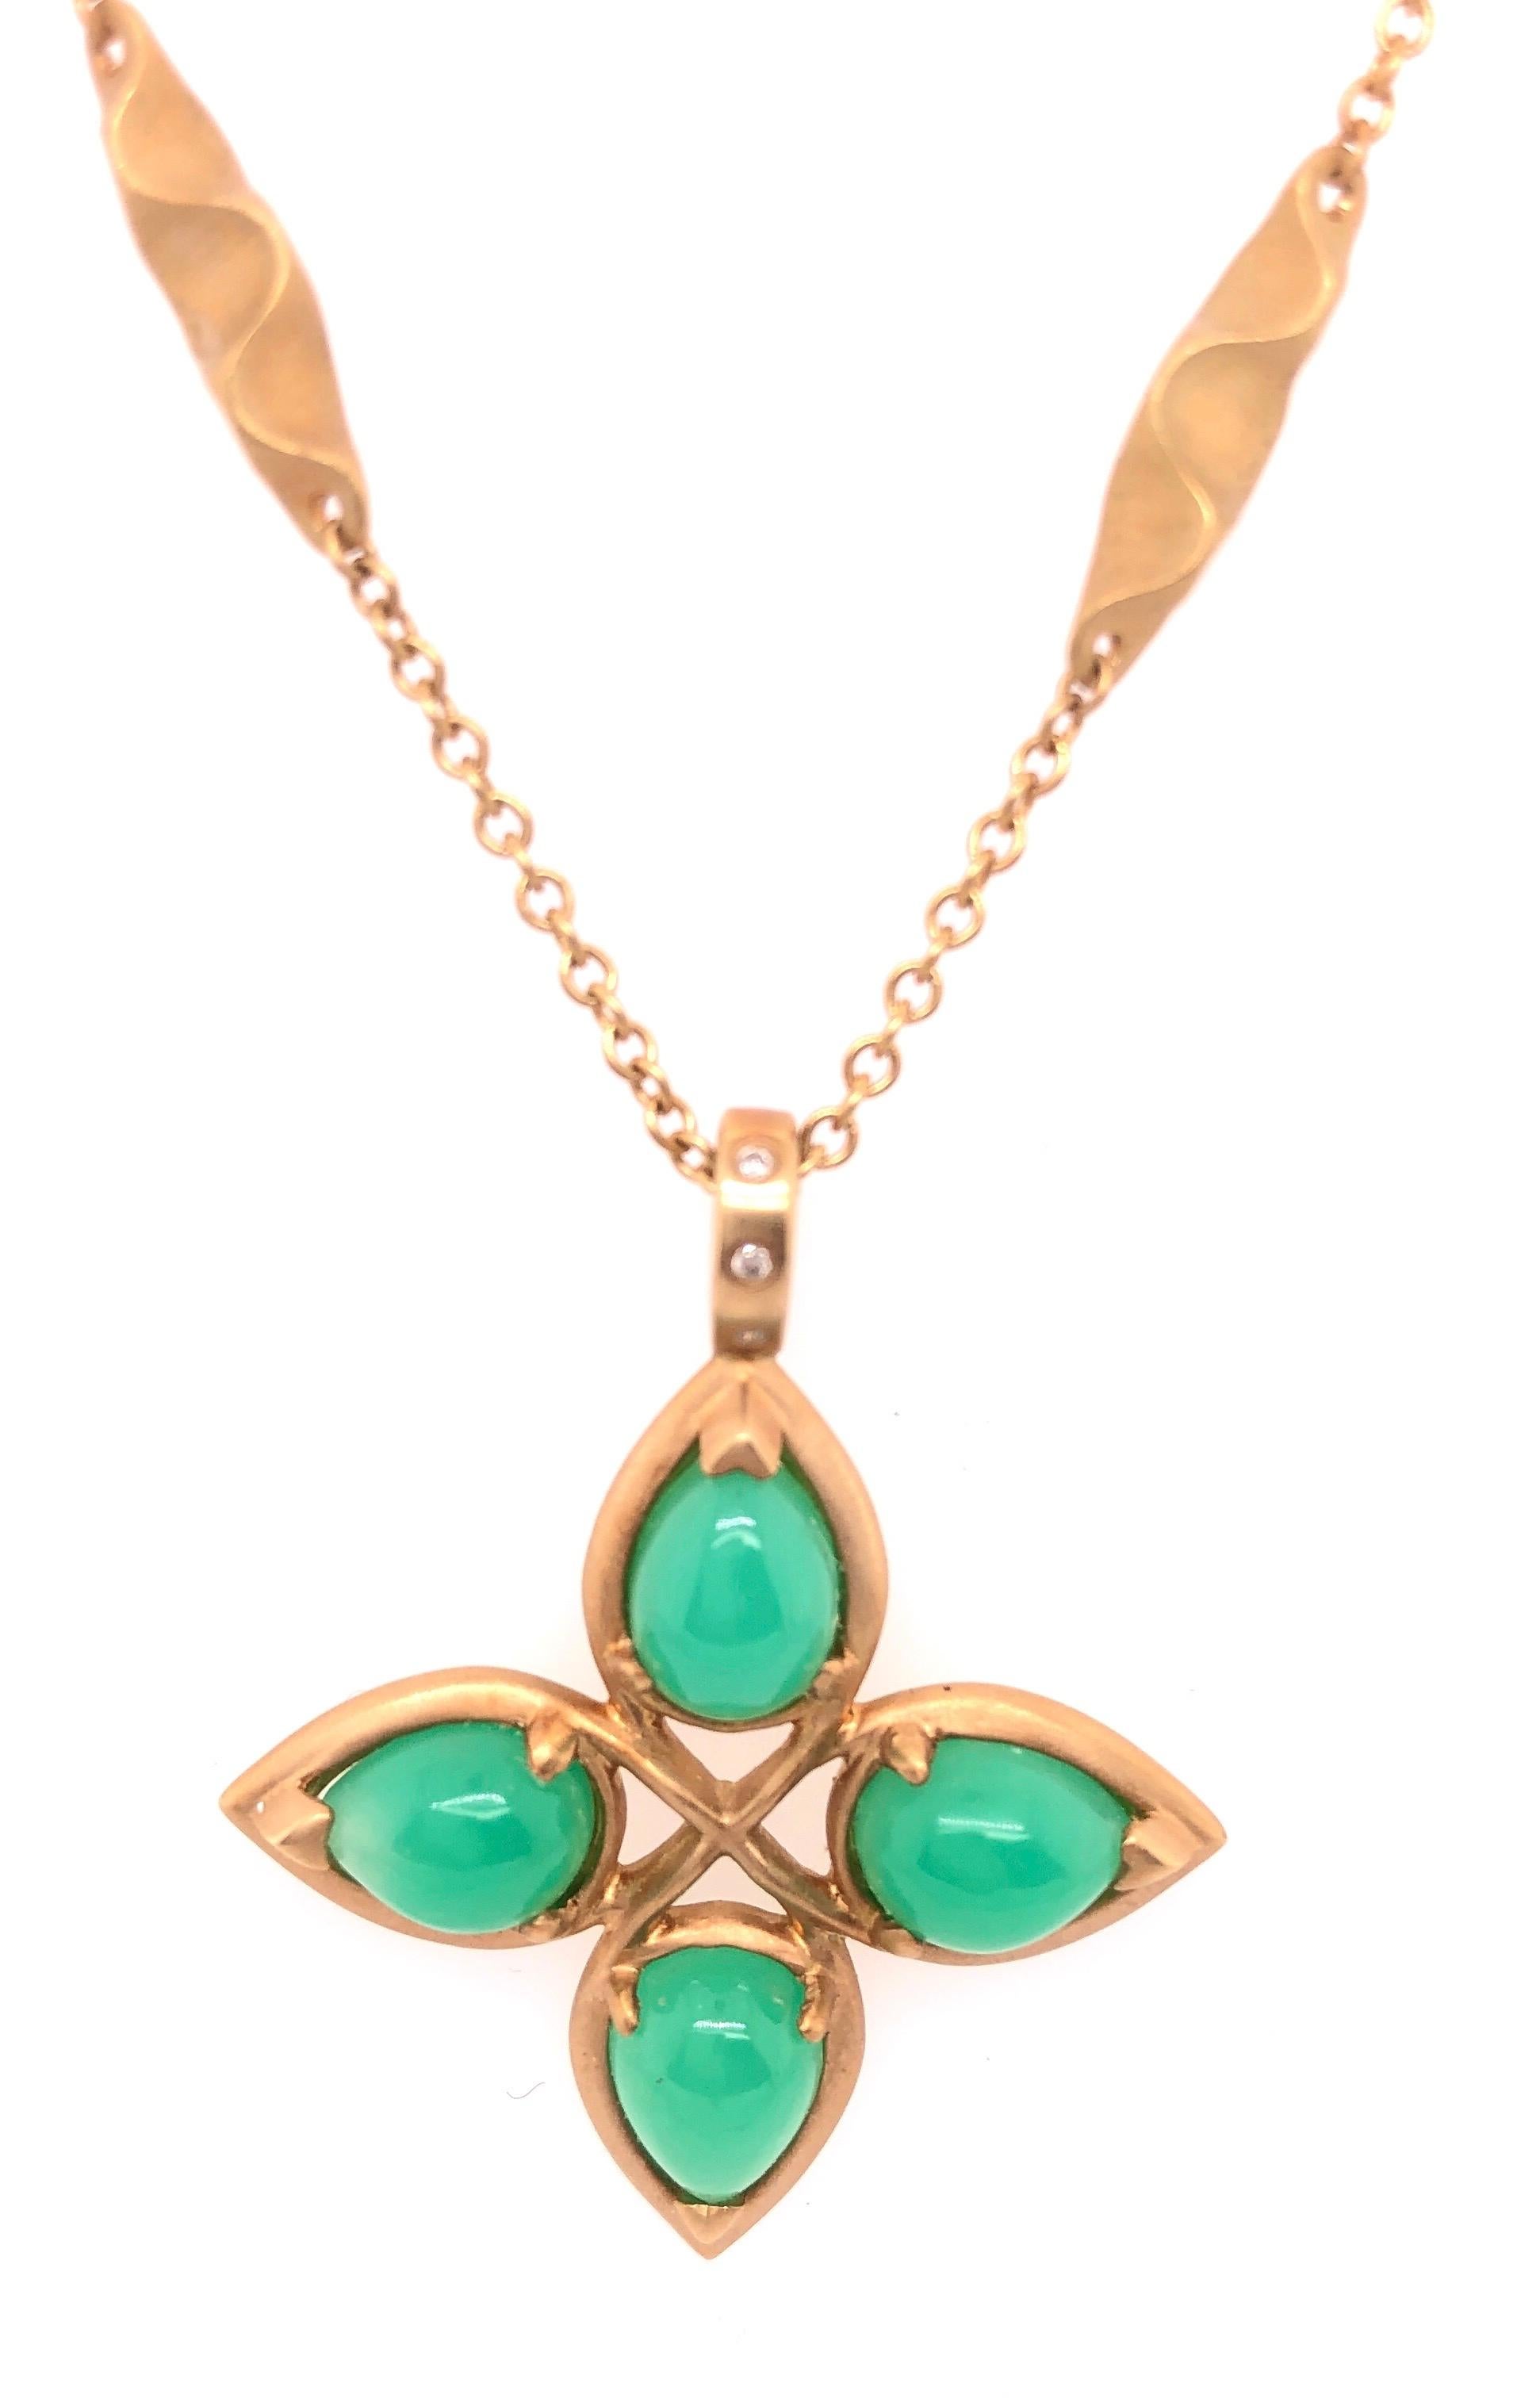 18Kt Yellow Gold Caleo Chrysoprase Pendant Necklace. Handmade Brooklyn NY. 

Prov. A Greenwich Ct Lady
Betteridge Jewelers Greenwich Ct. 